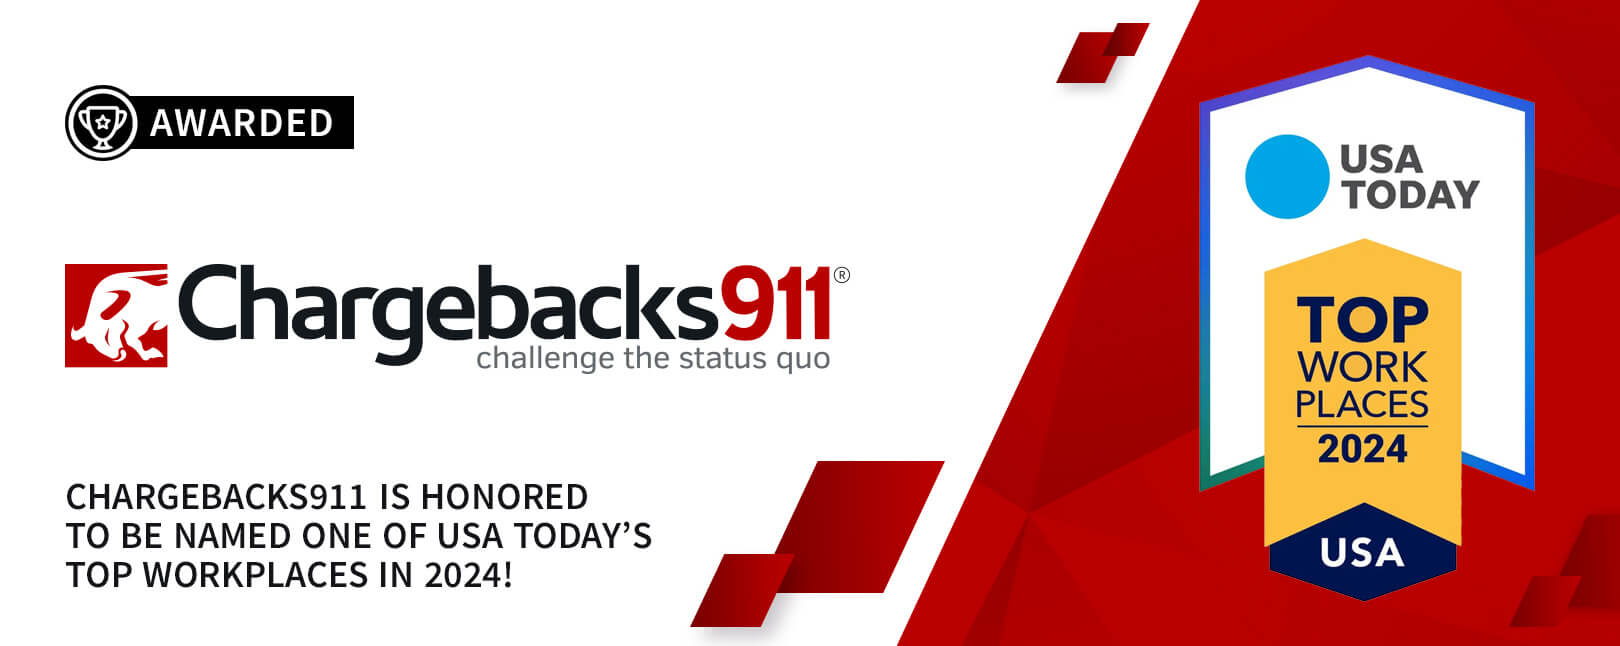 Chargebacks911®: a “Top Workplace” in the USA for 2024!